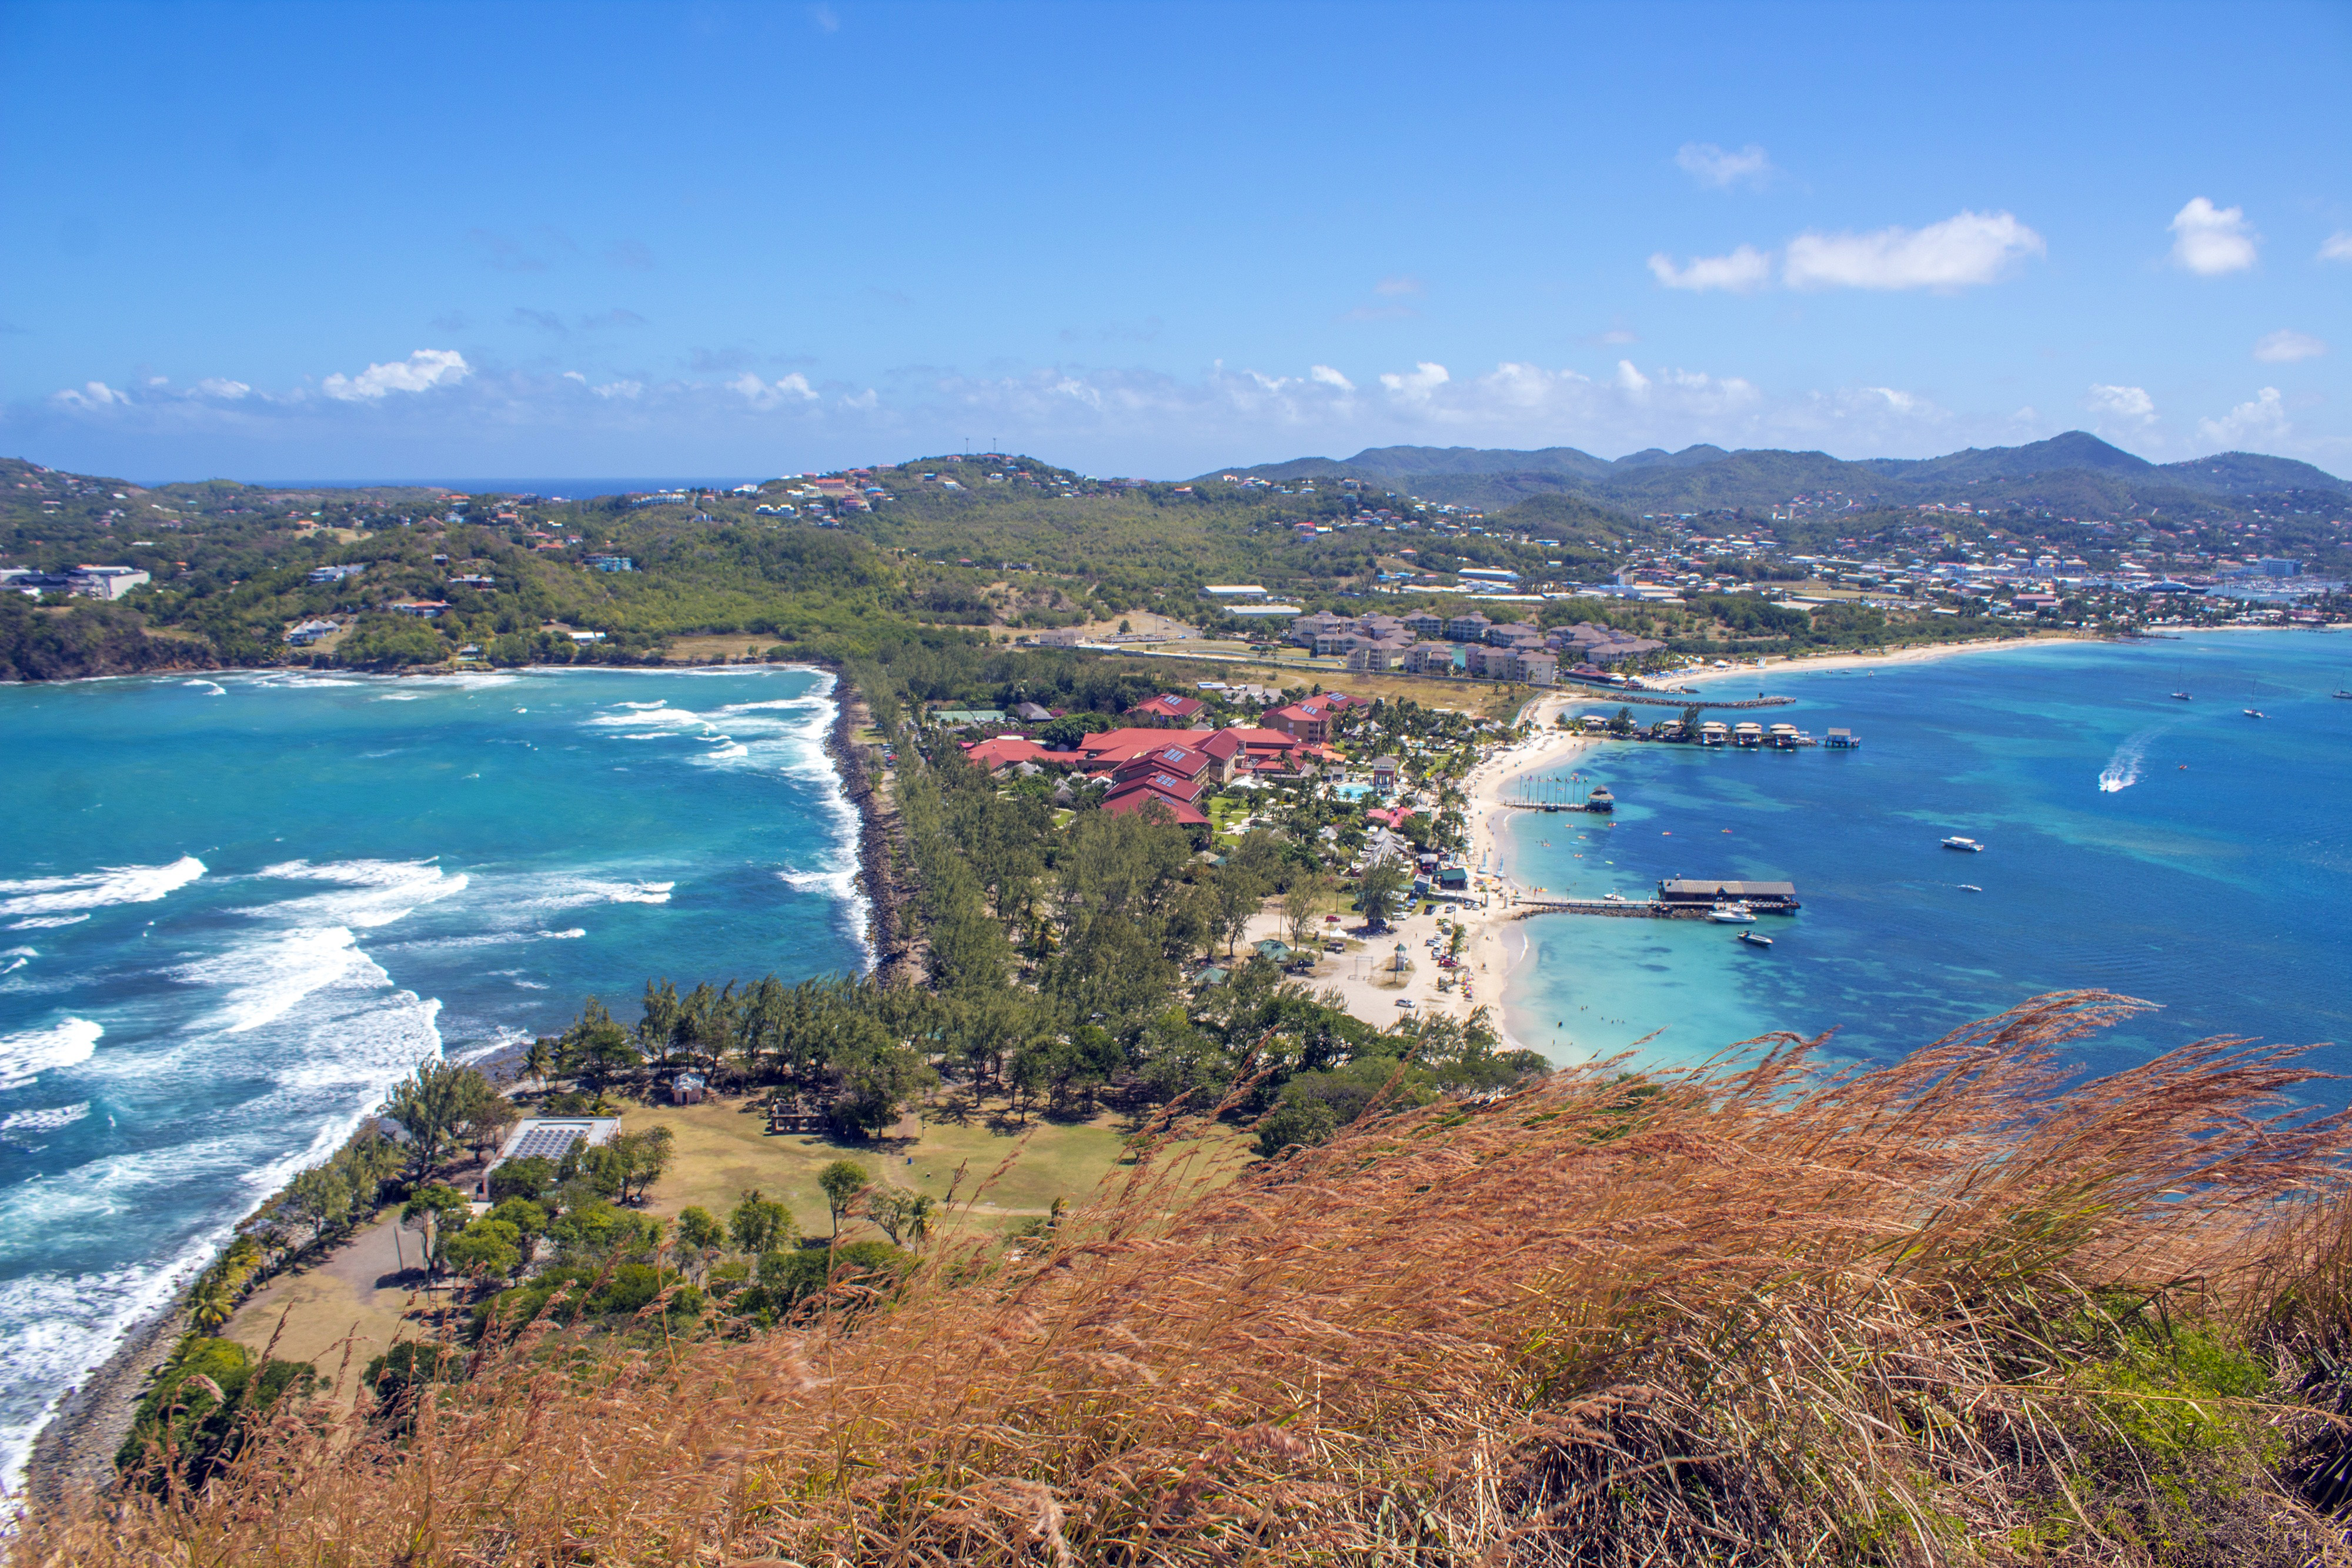 View of the Caribbean island St. Lucia: left the Atlantic Ocean, right the Caribbean Sea